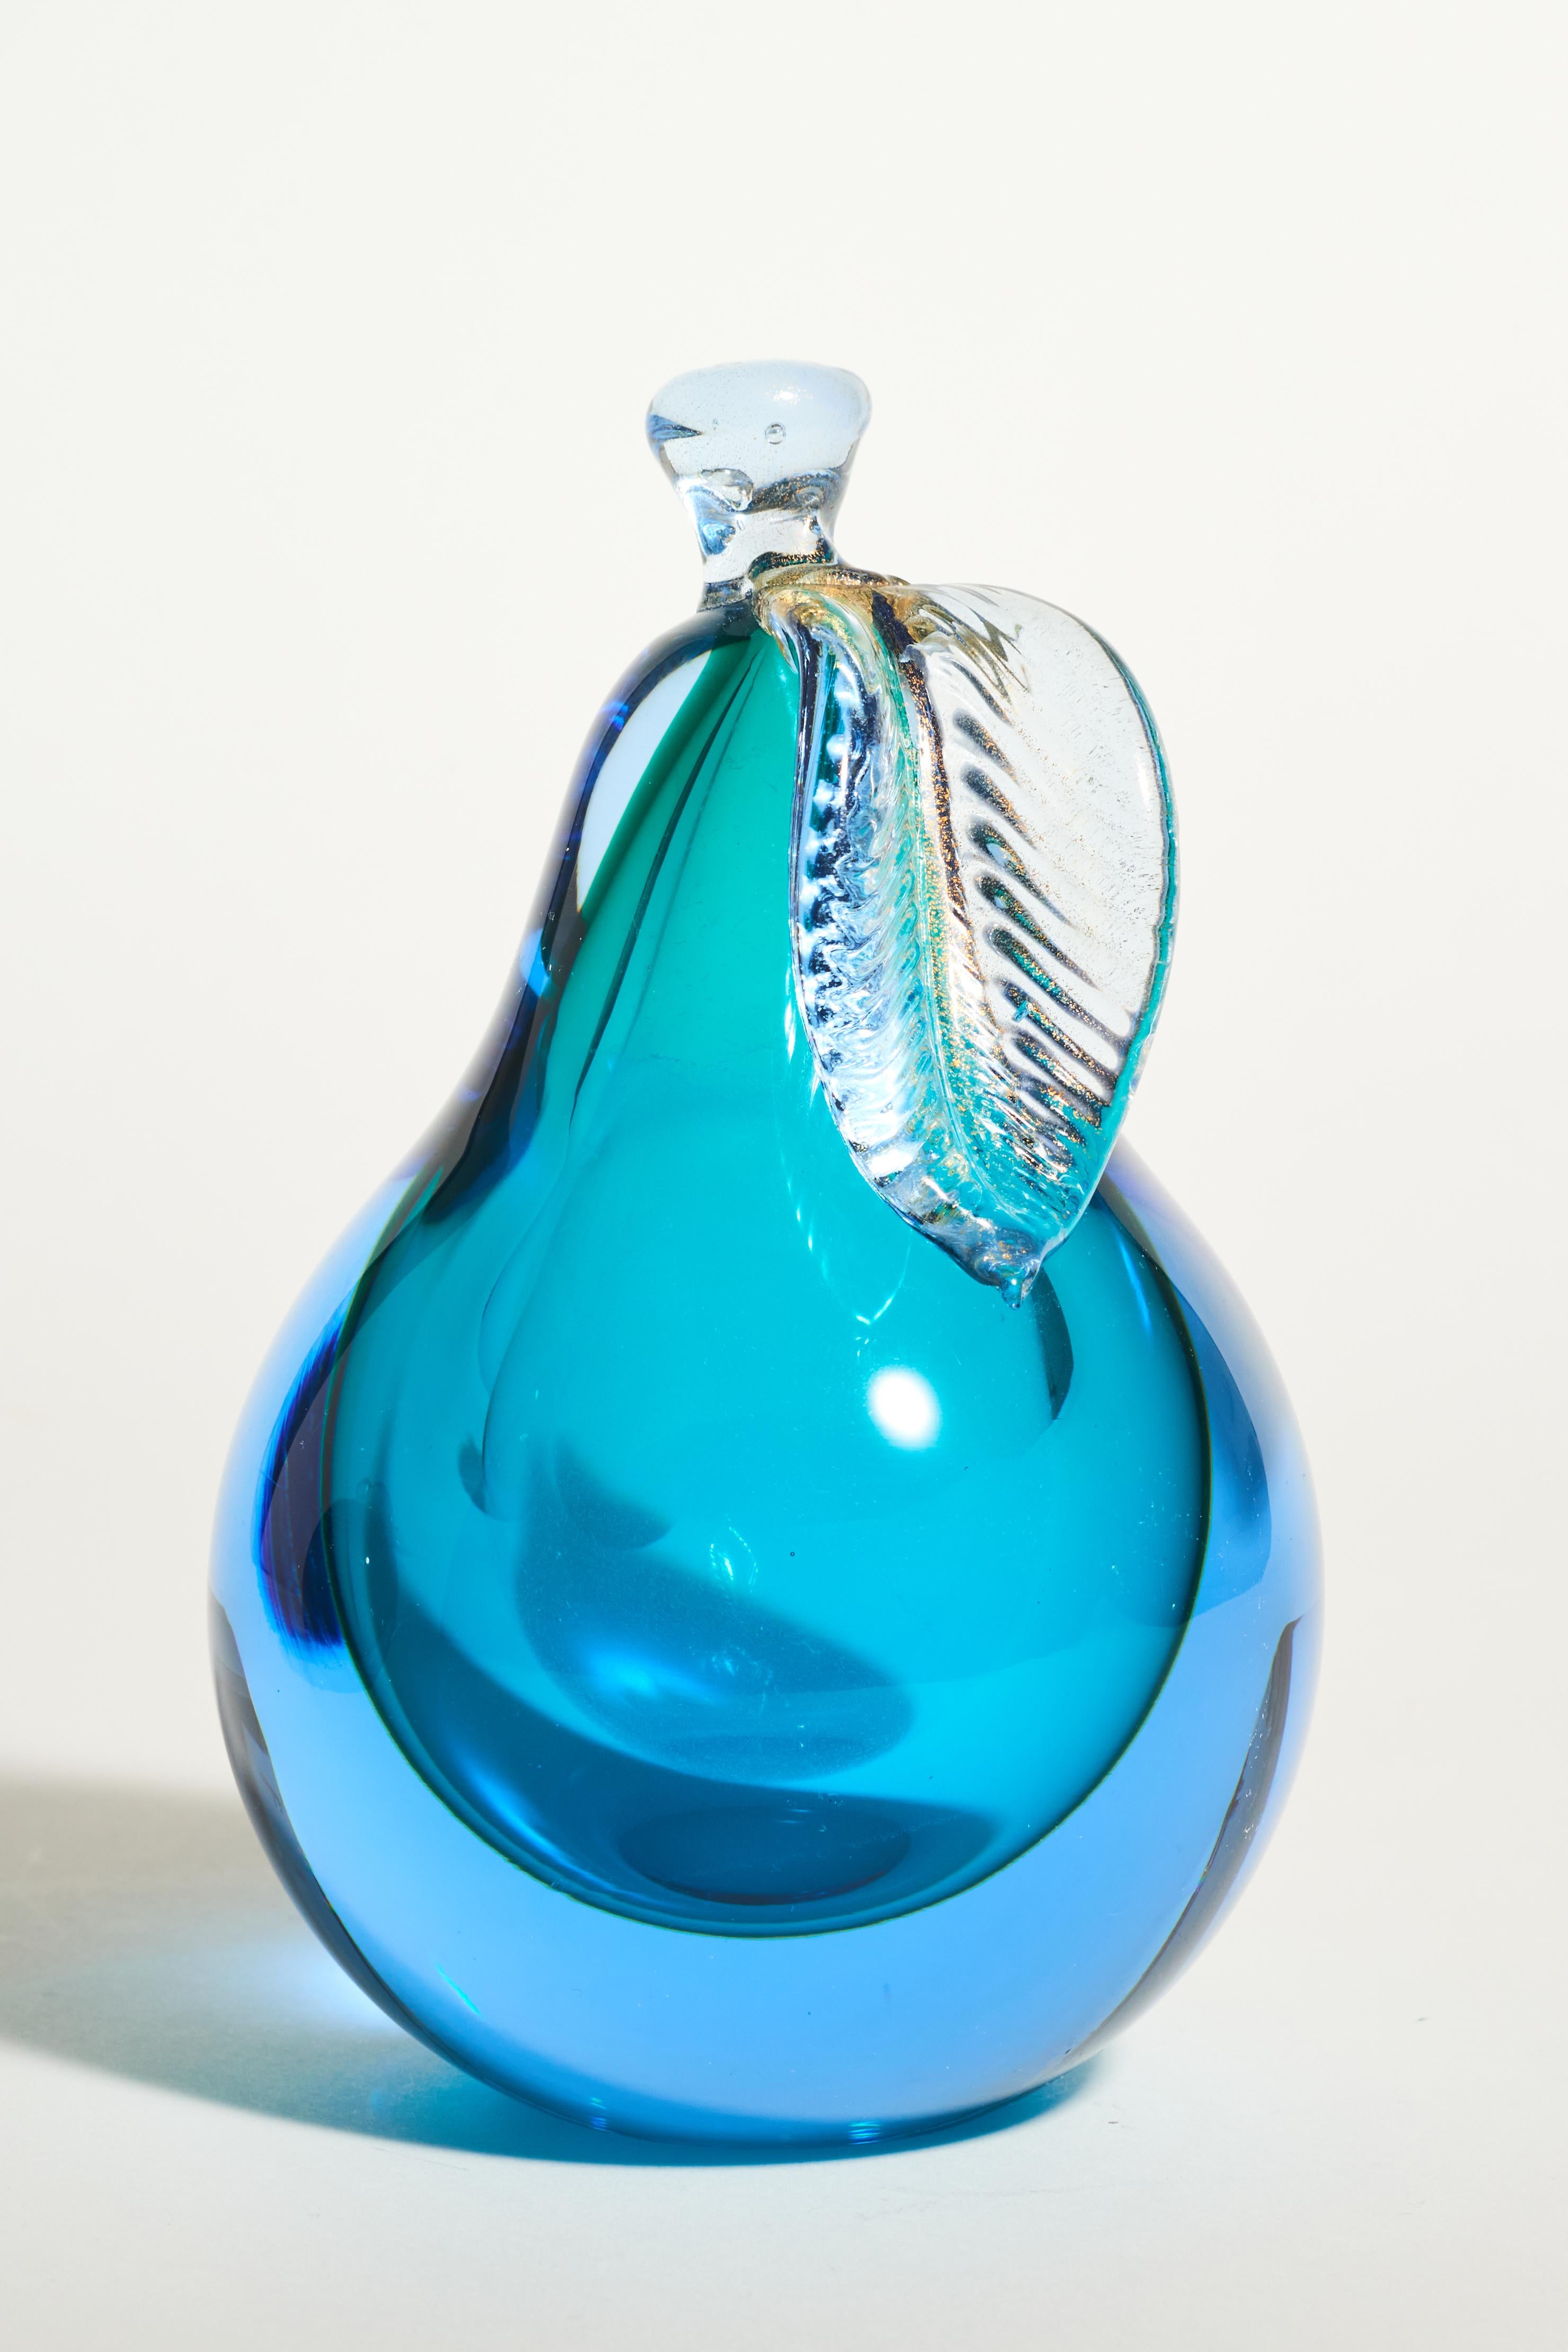 Murano Glass Blue Apple and Pear Bookends 1